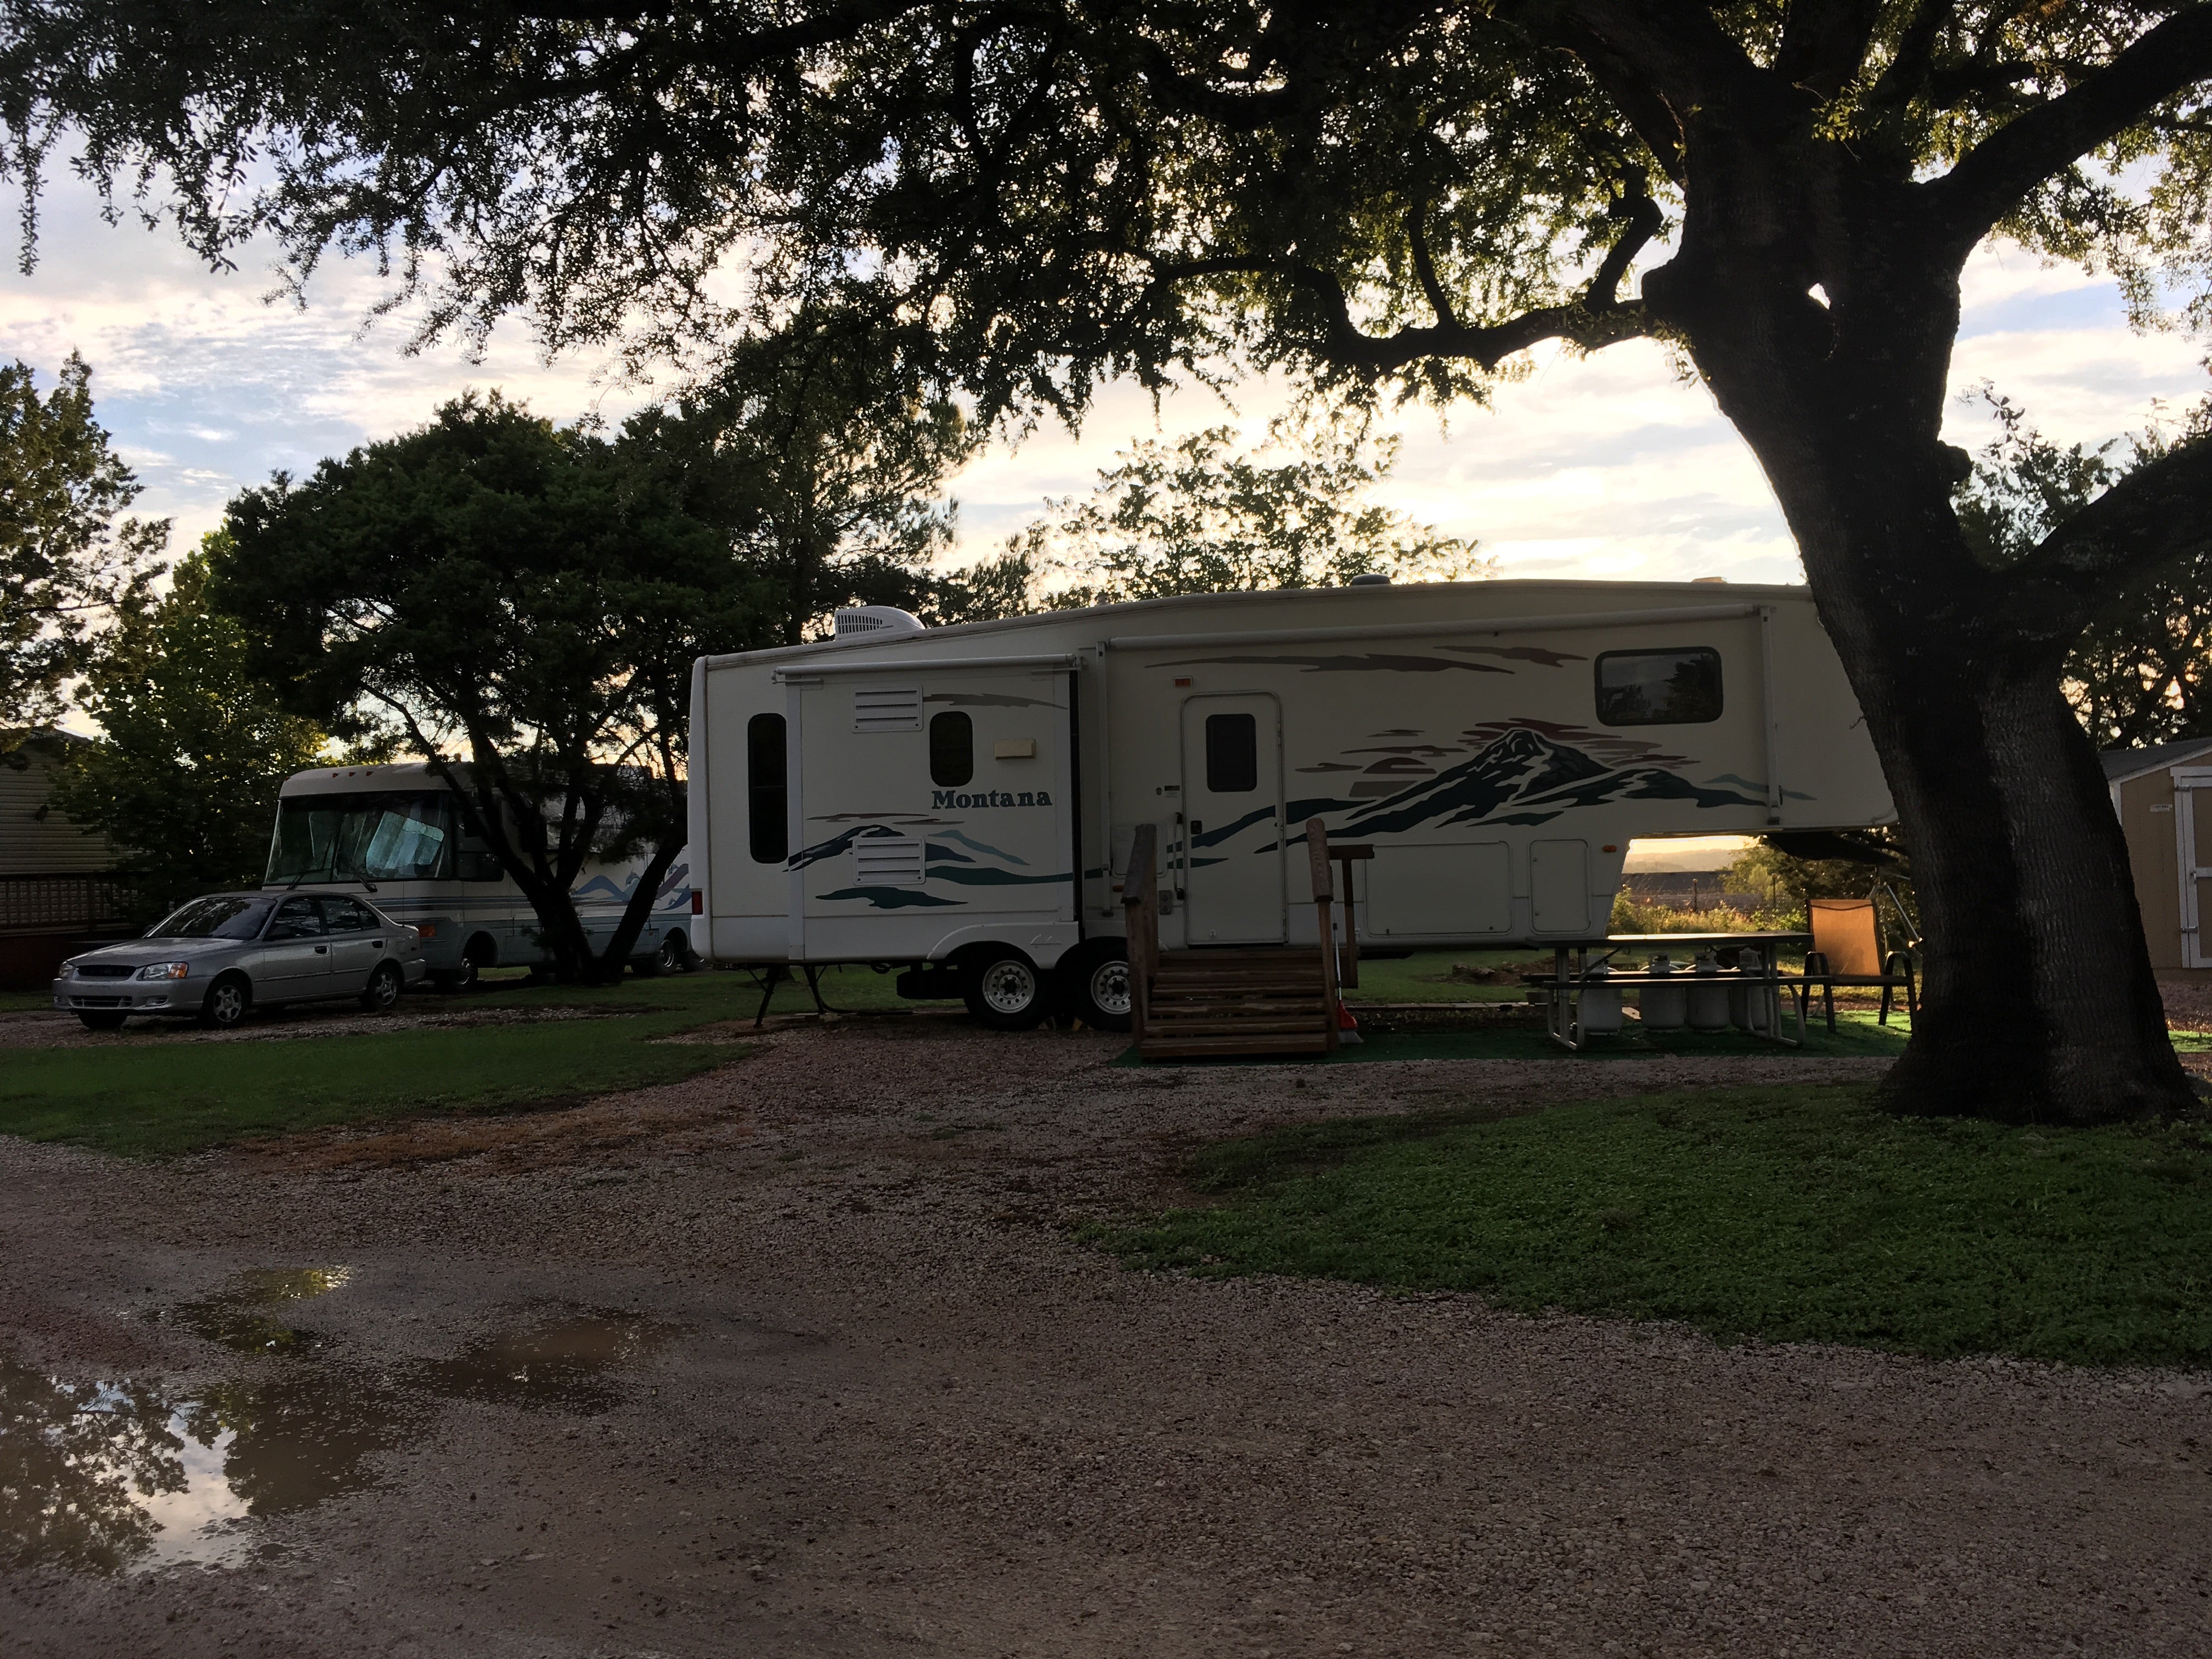 Most of the RV sites are back in sites